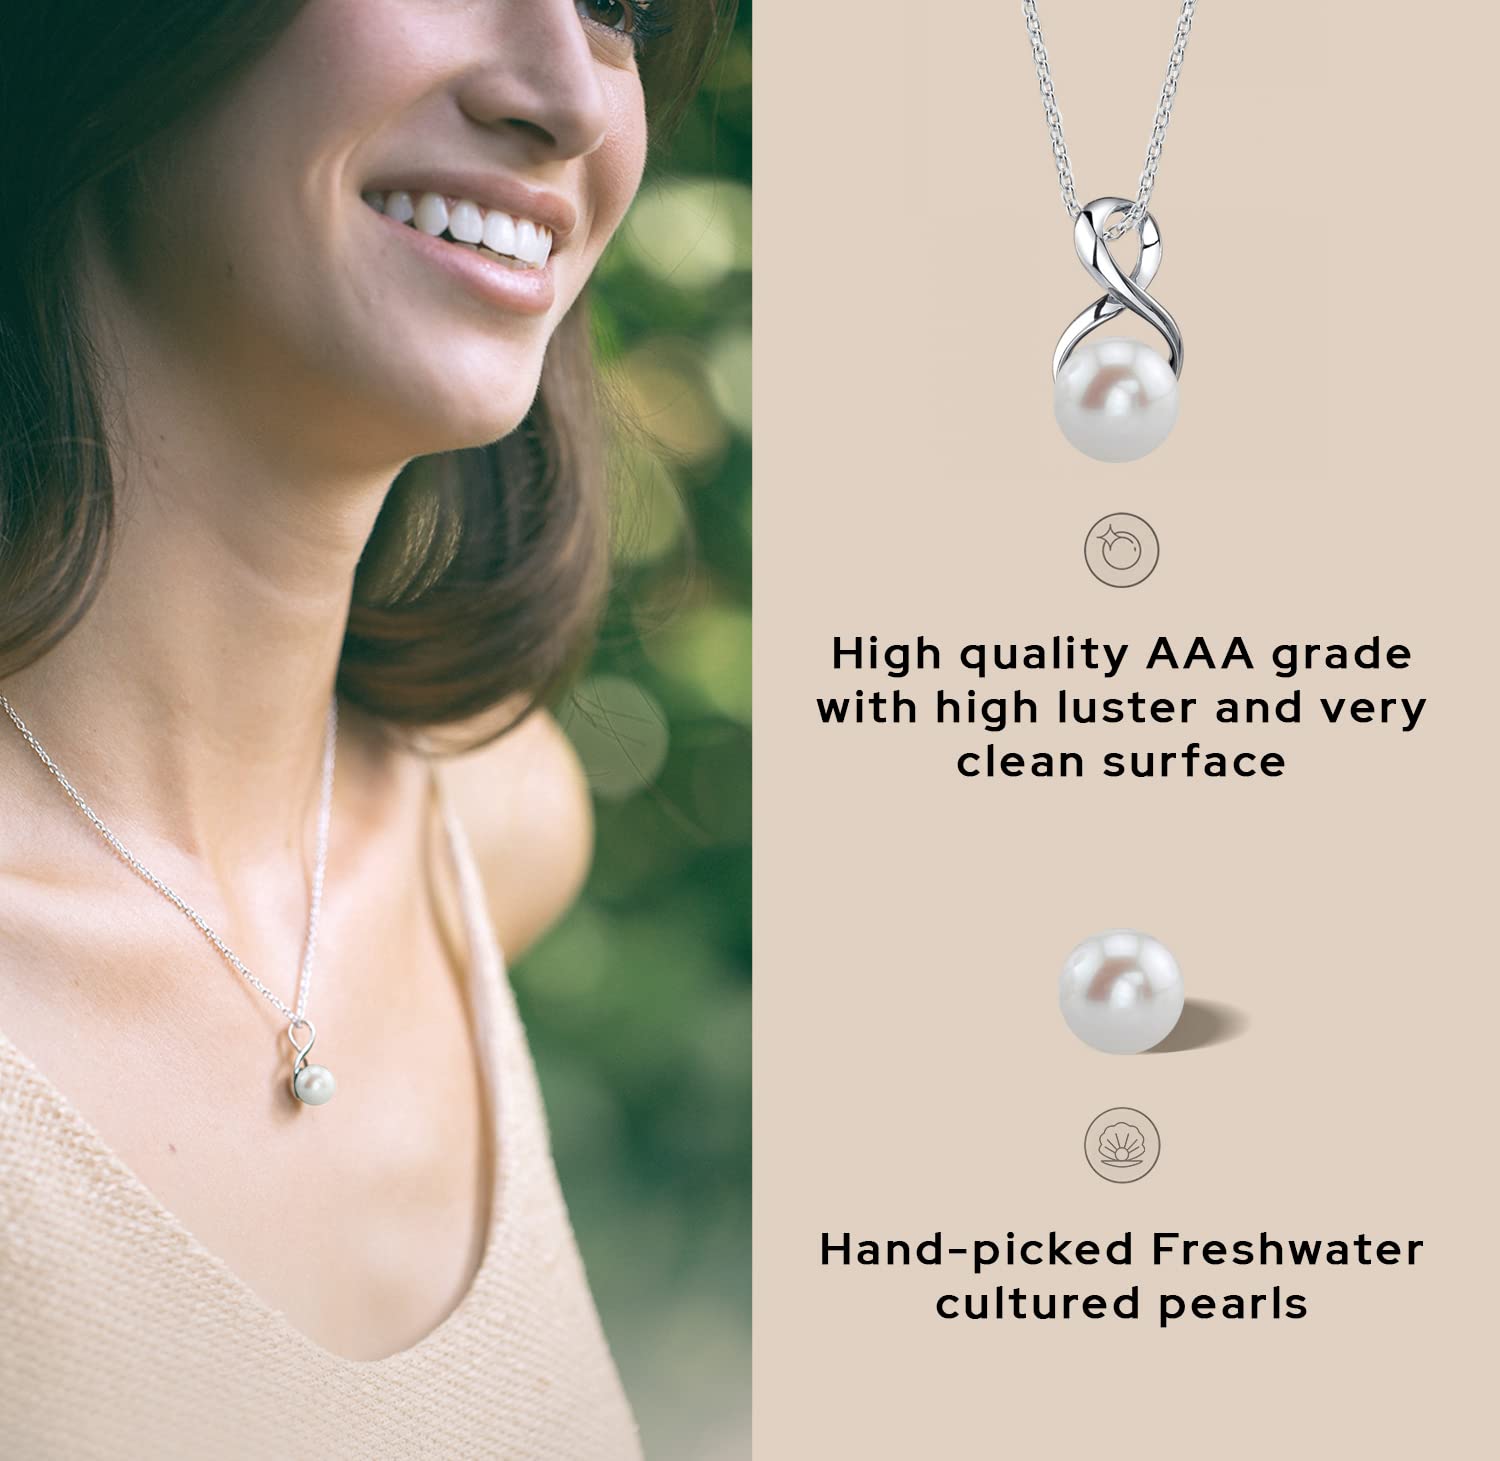 The Pearl Source Freshwater Pearl Pendant Necklace for Women - White Cultured Pearl Necklace with Infinity Design | Single Pearl Necklace for Women with 925 Sterling Silver Chain, 9.0-10.0mm